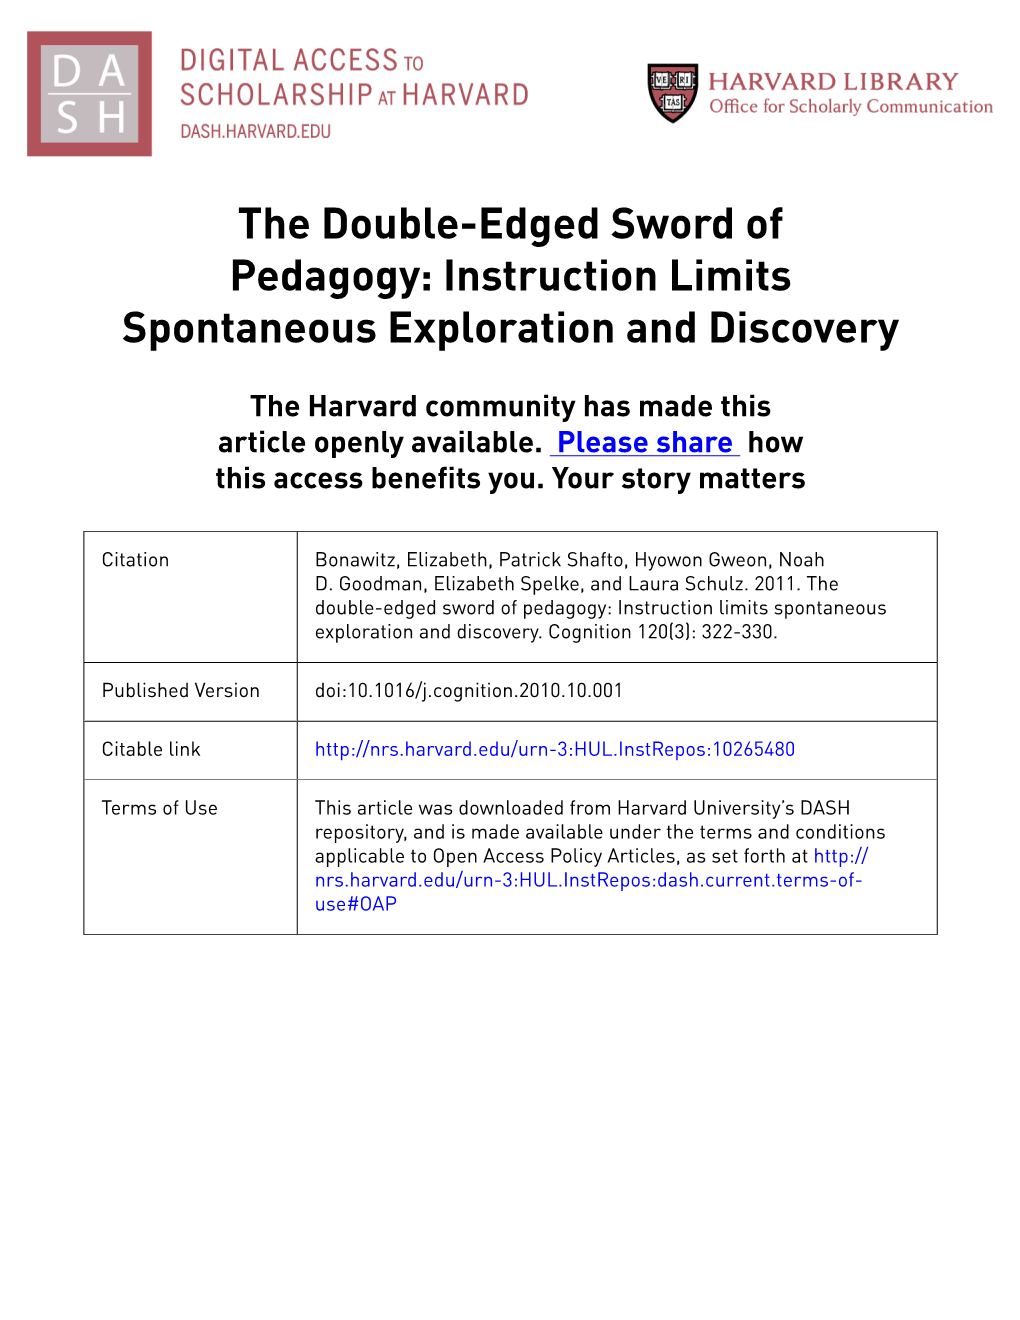 The Double-Edged Sword of Pedagogy: Instruction Limits Spontaneous Exploration and Discovery